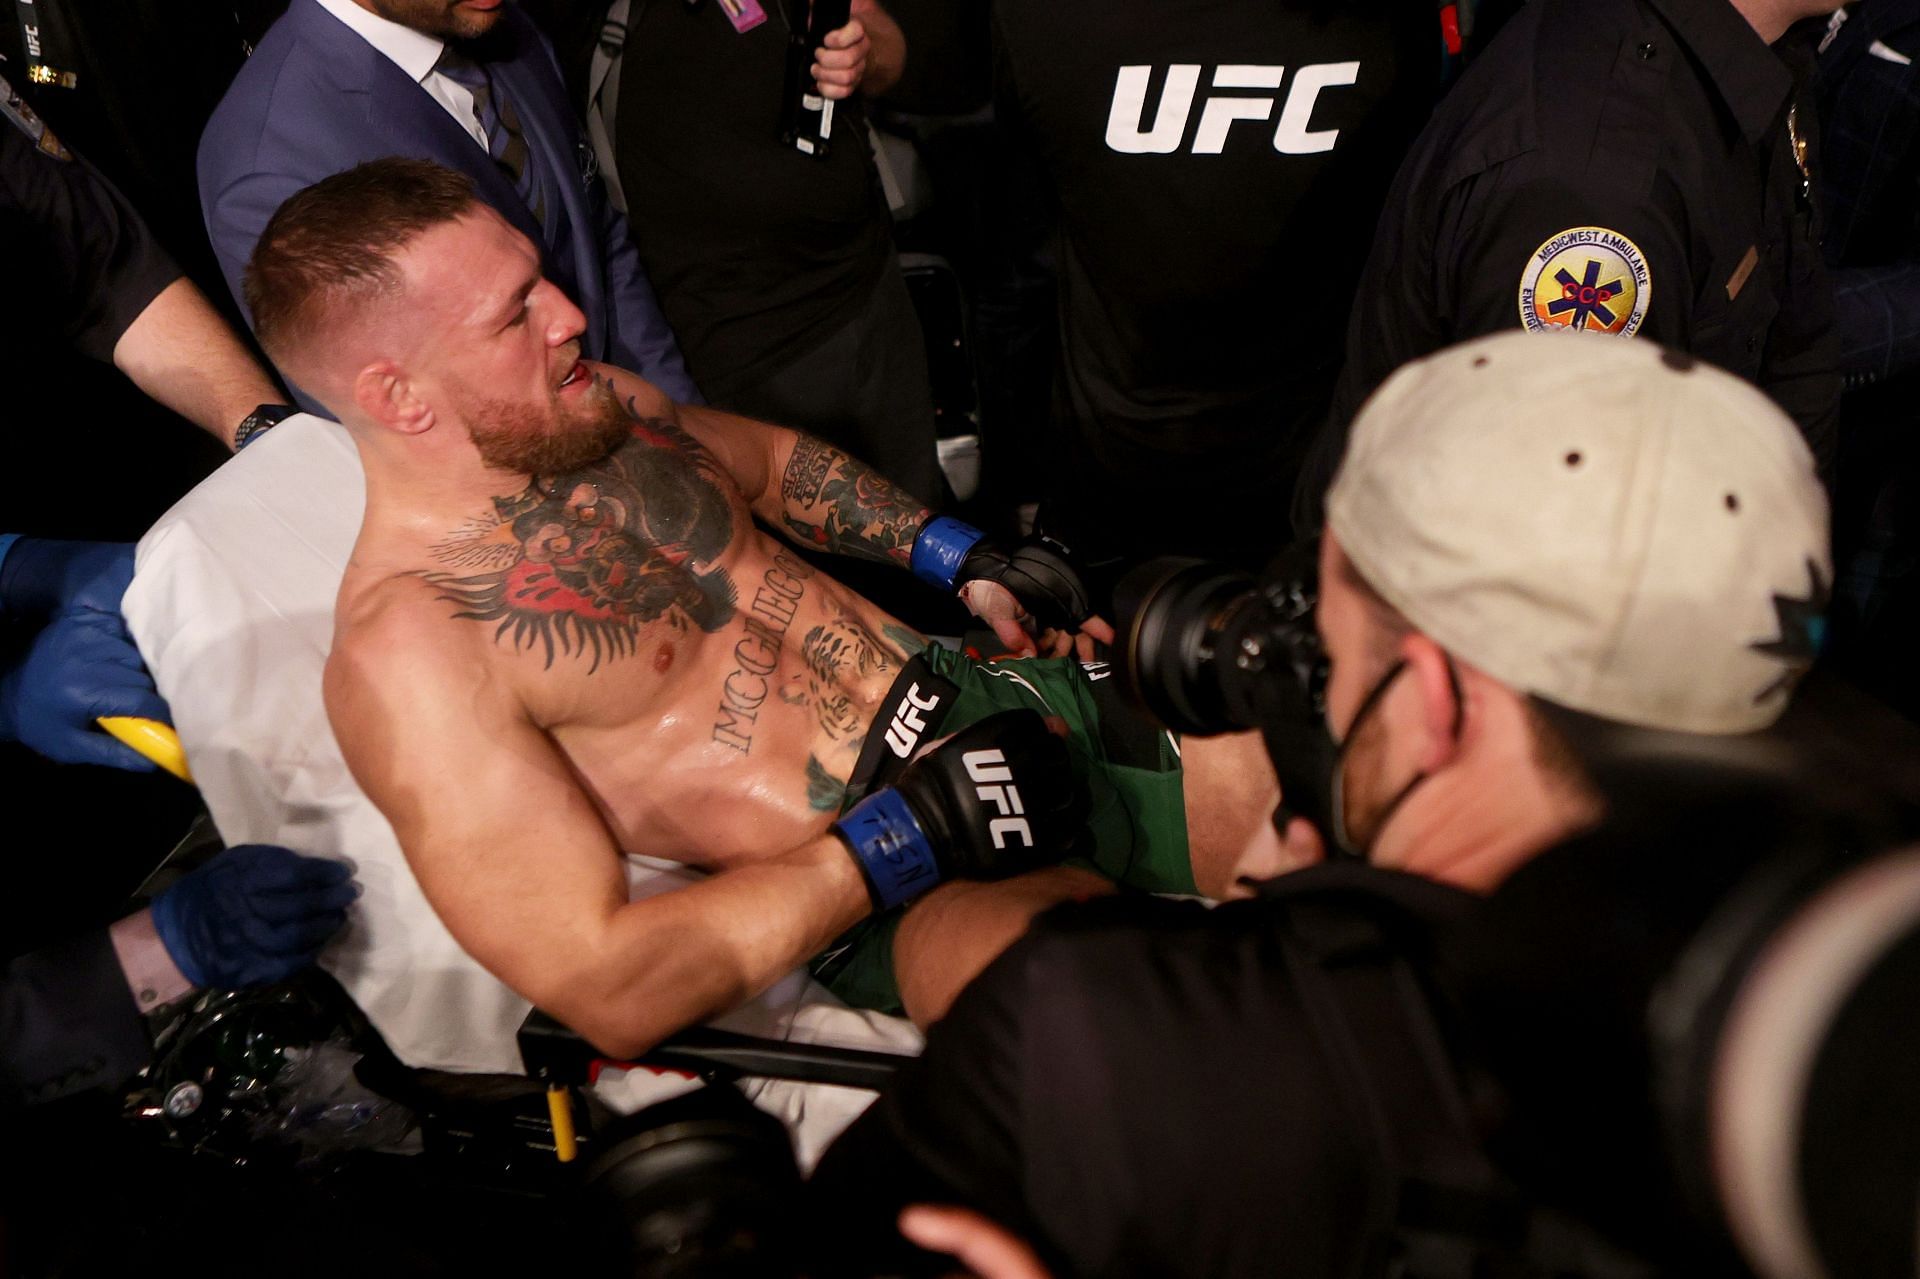 After his losses to Dustin Poirier, Conor McGregor is in desperate need of a win